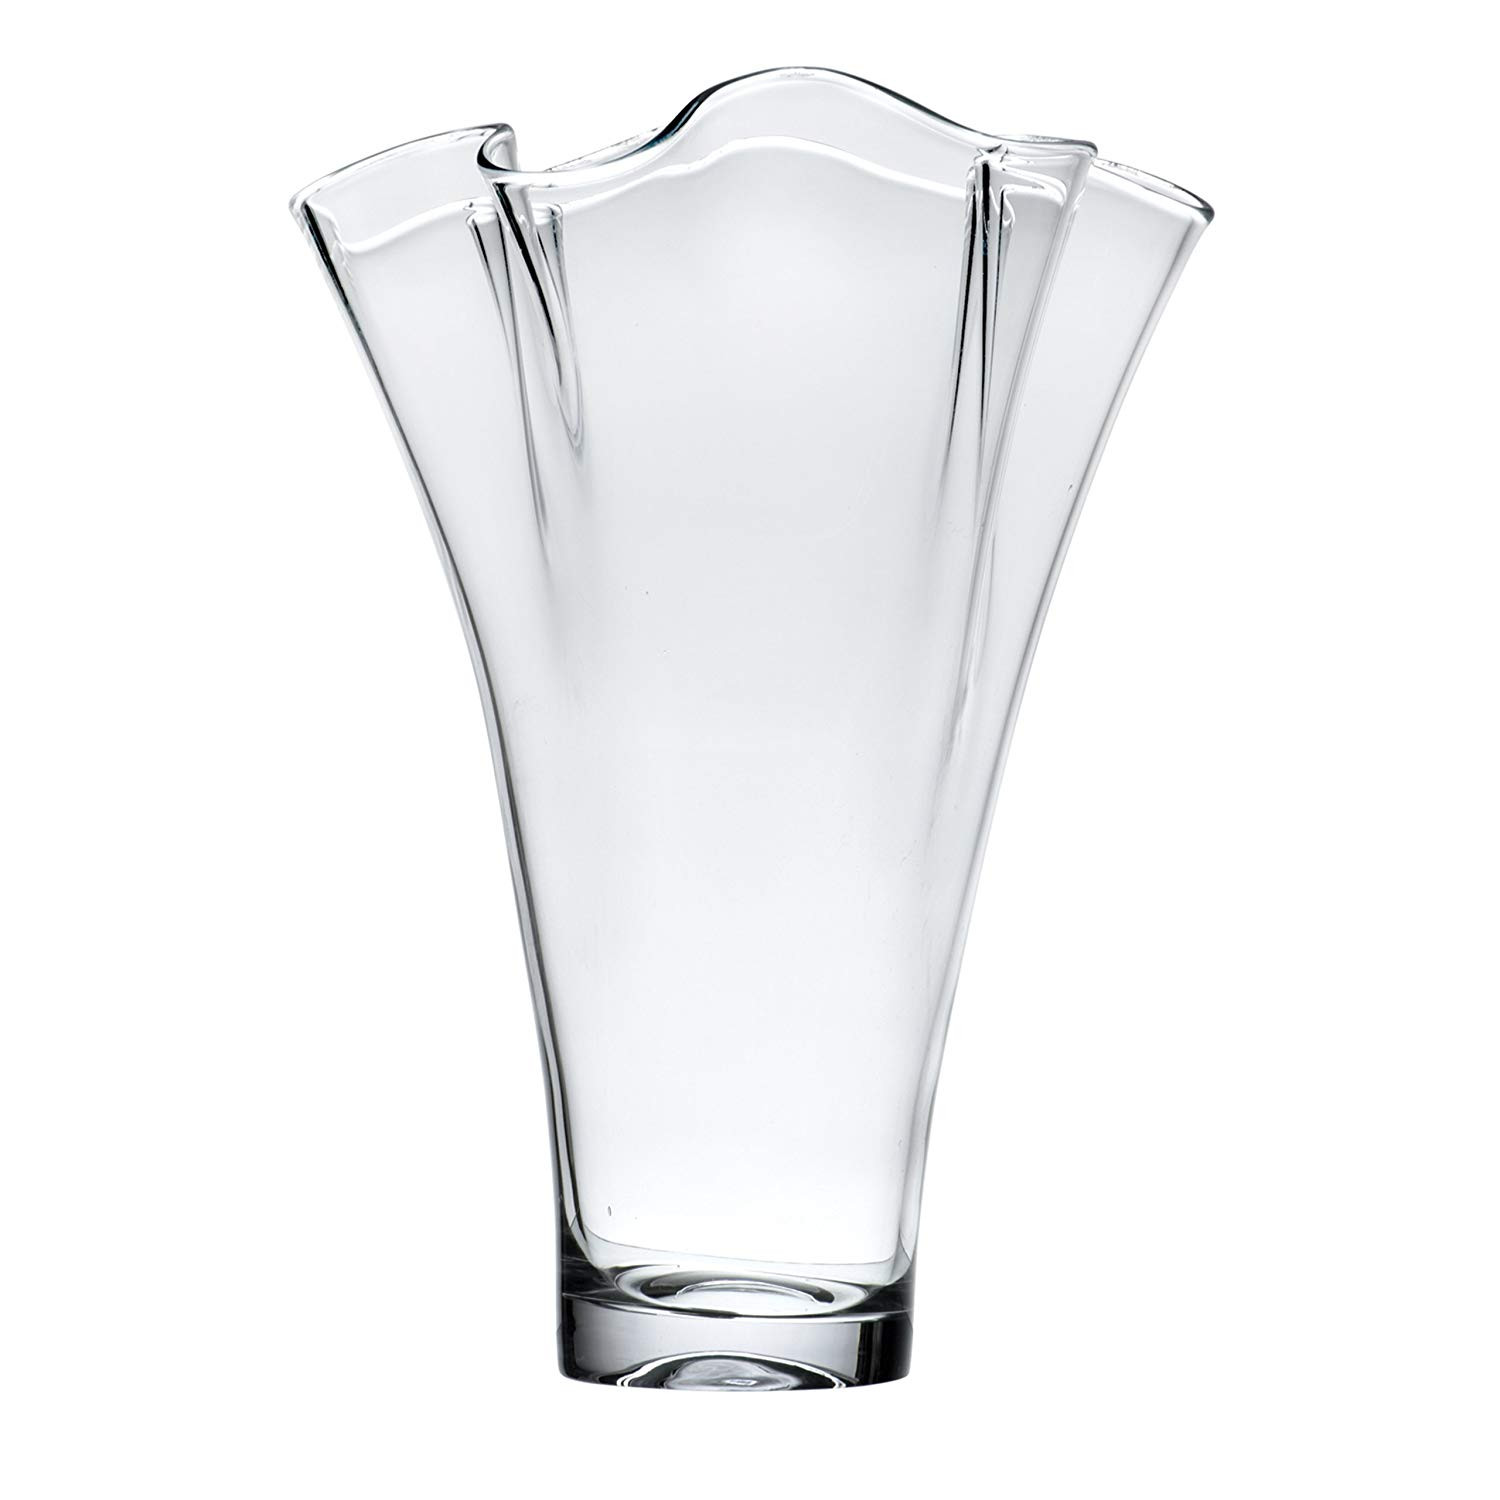 25 Great Marquis by Waterford Markham Vase 2024 free download marquis by waterford markham vase of amazon com lenox organics ruffle wide crystal vase home kitchen intended for 71wp2r5 4el sl1500